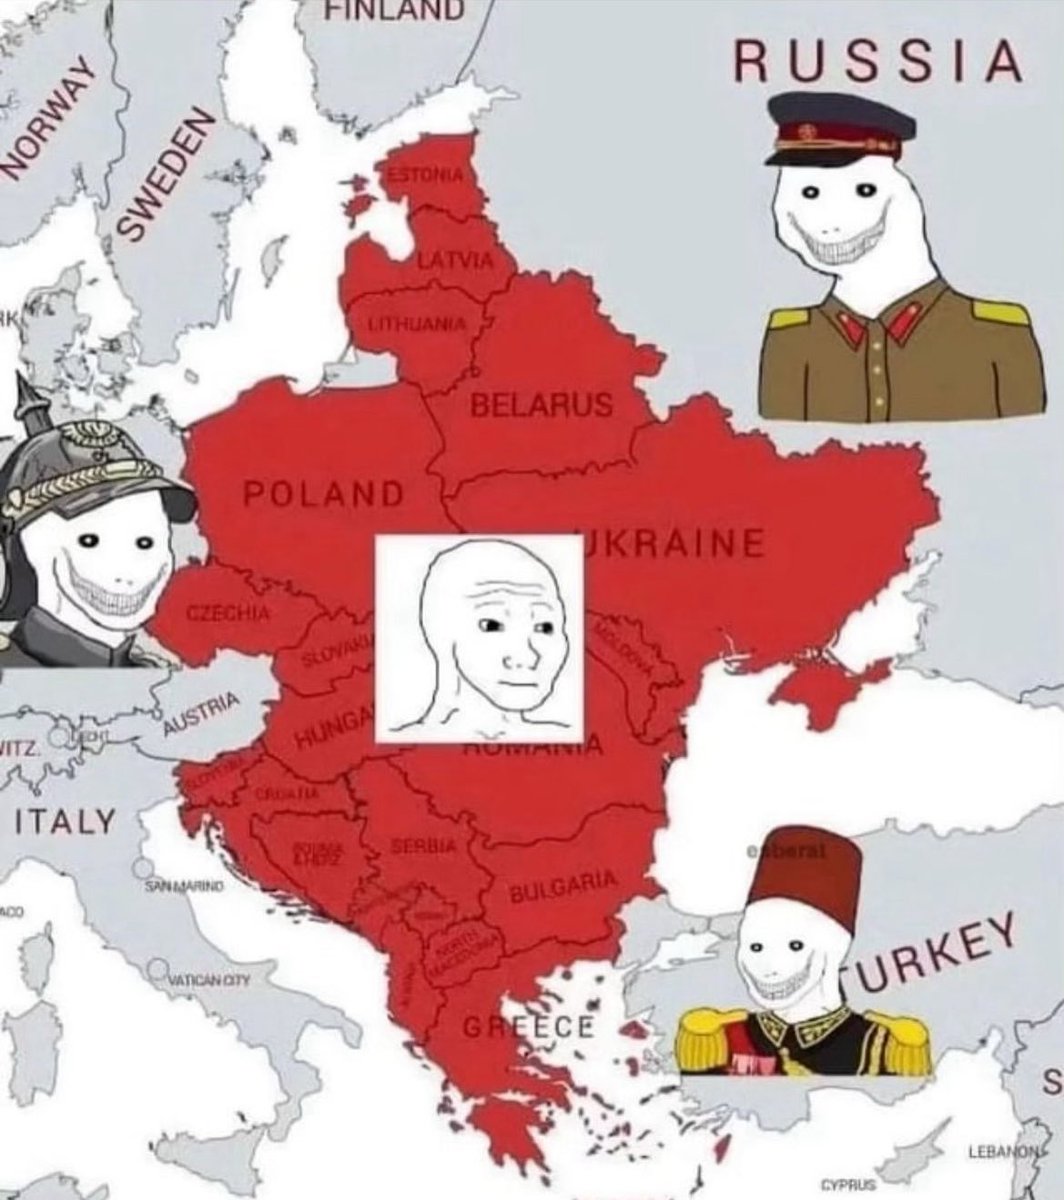 A brief history of eastern europe and the balkans